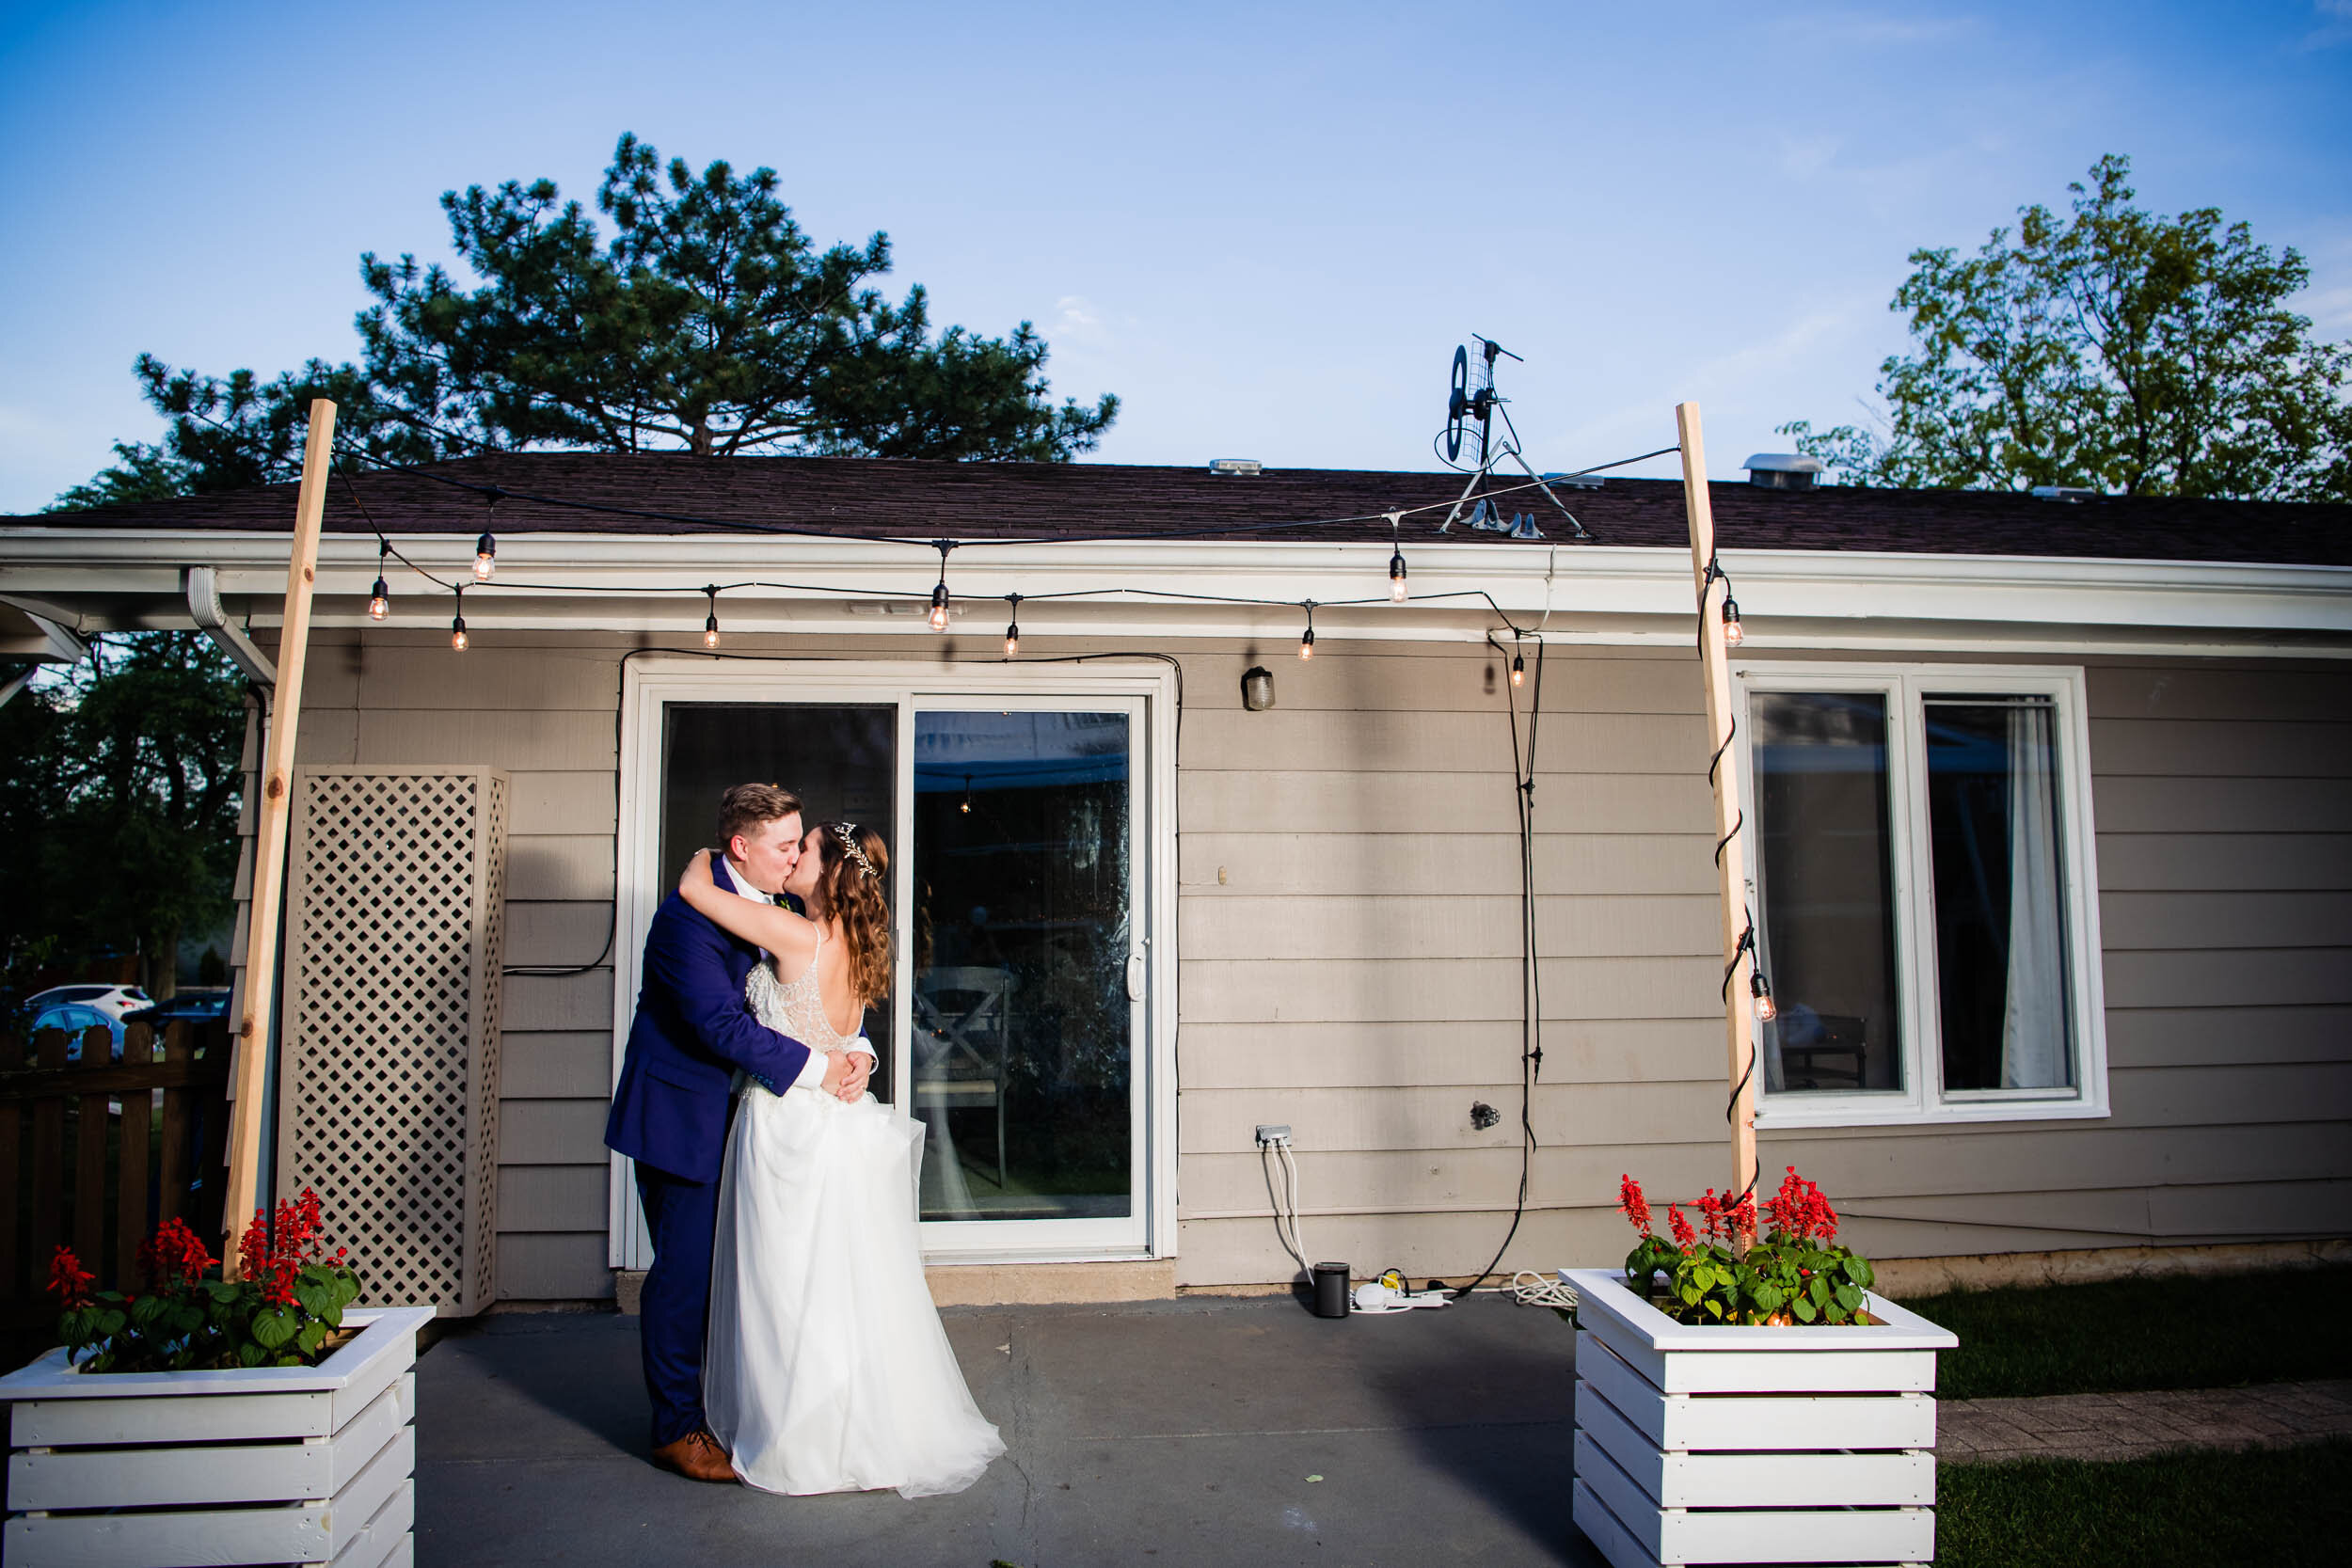 The couple's first dance outside their home:  Chicago backyard wedding photographed by J. Brown Photography.